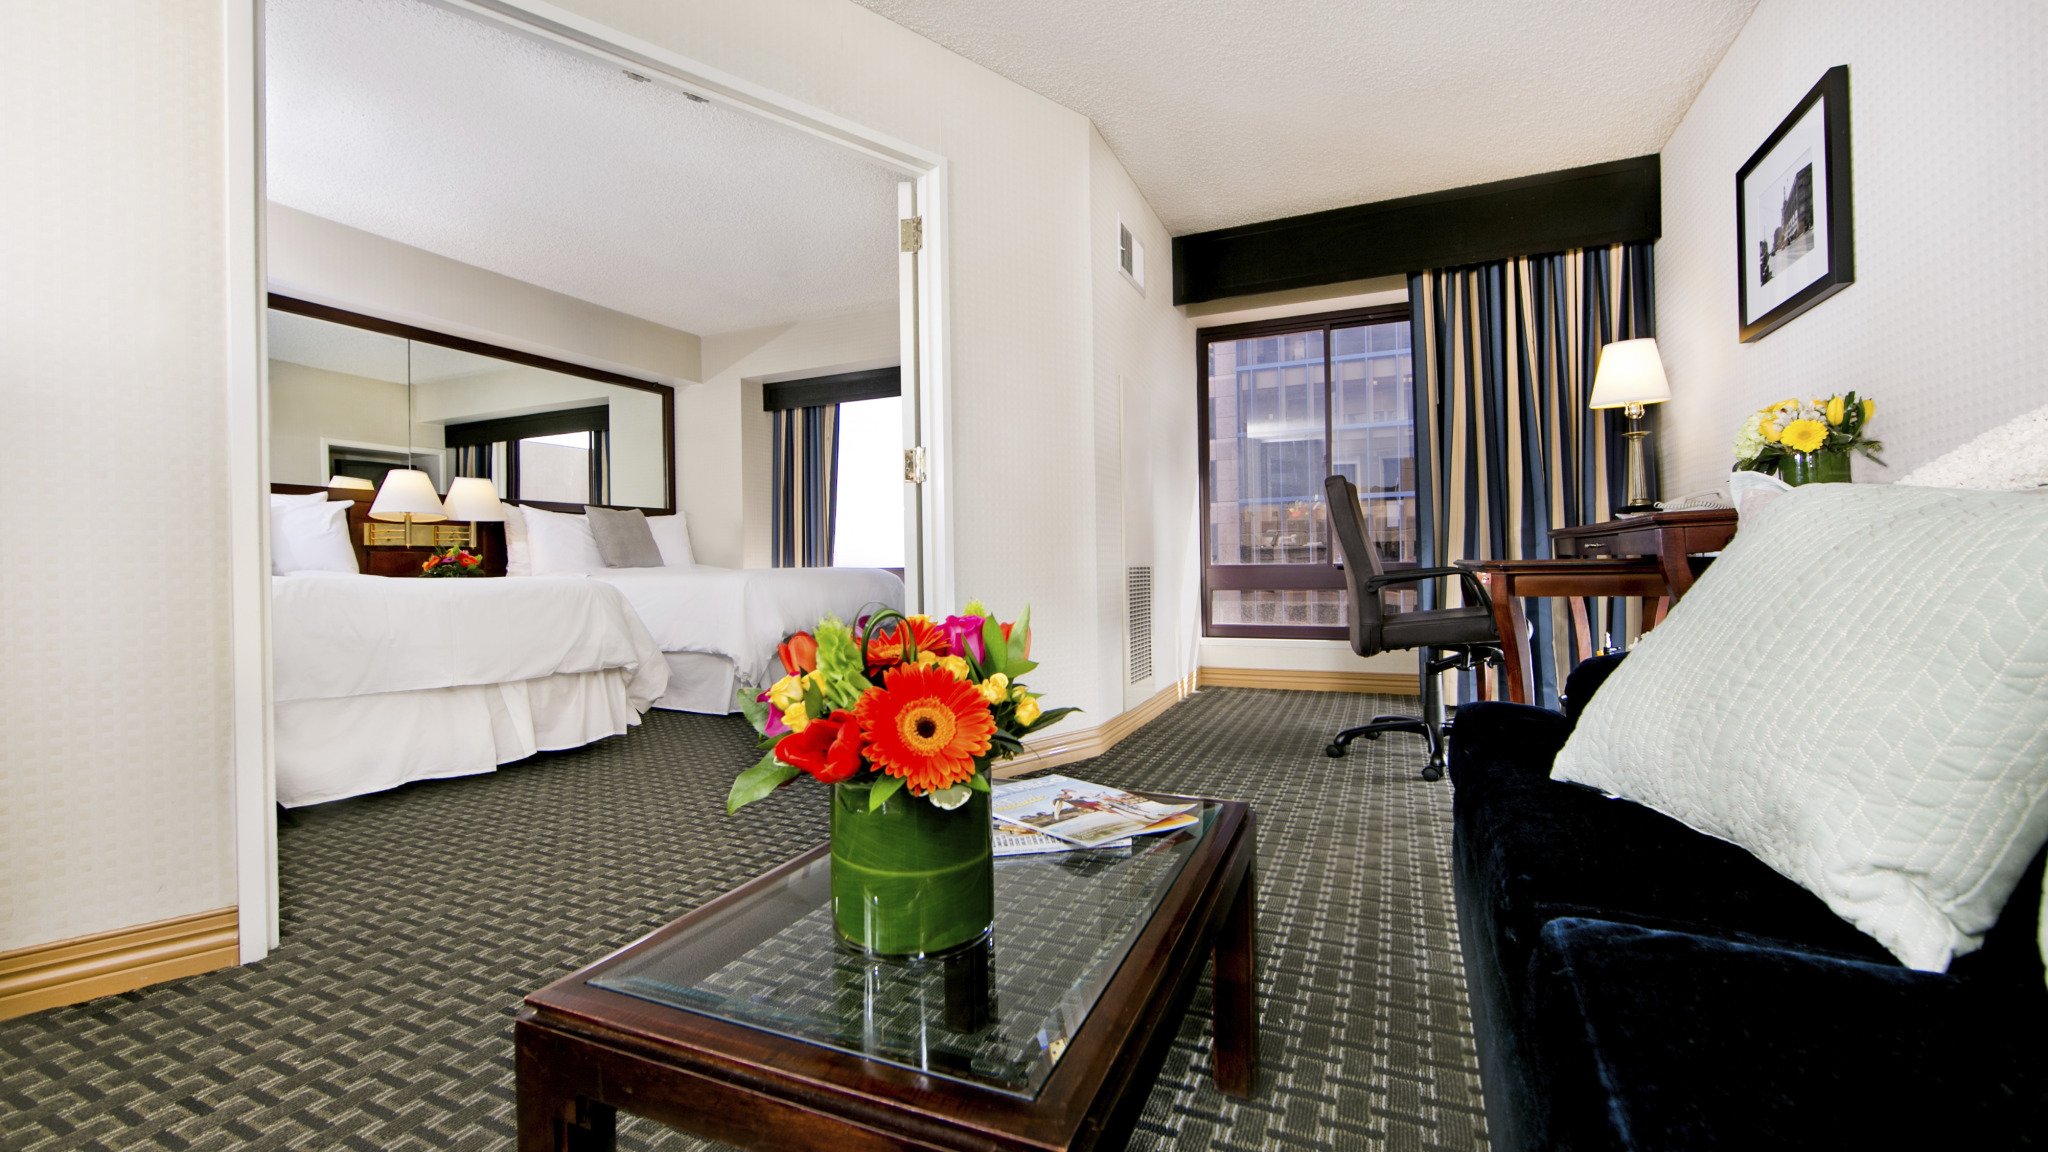 Declan Suite San Diego - A San Diego Hotel is conveniently located near top San Diego activities and events.